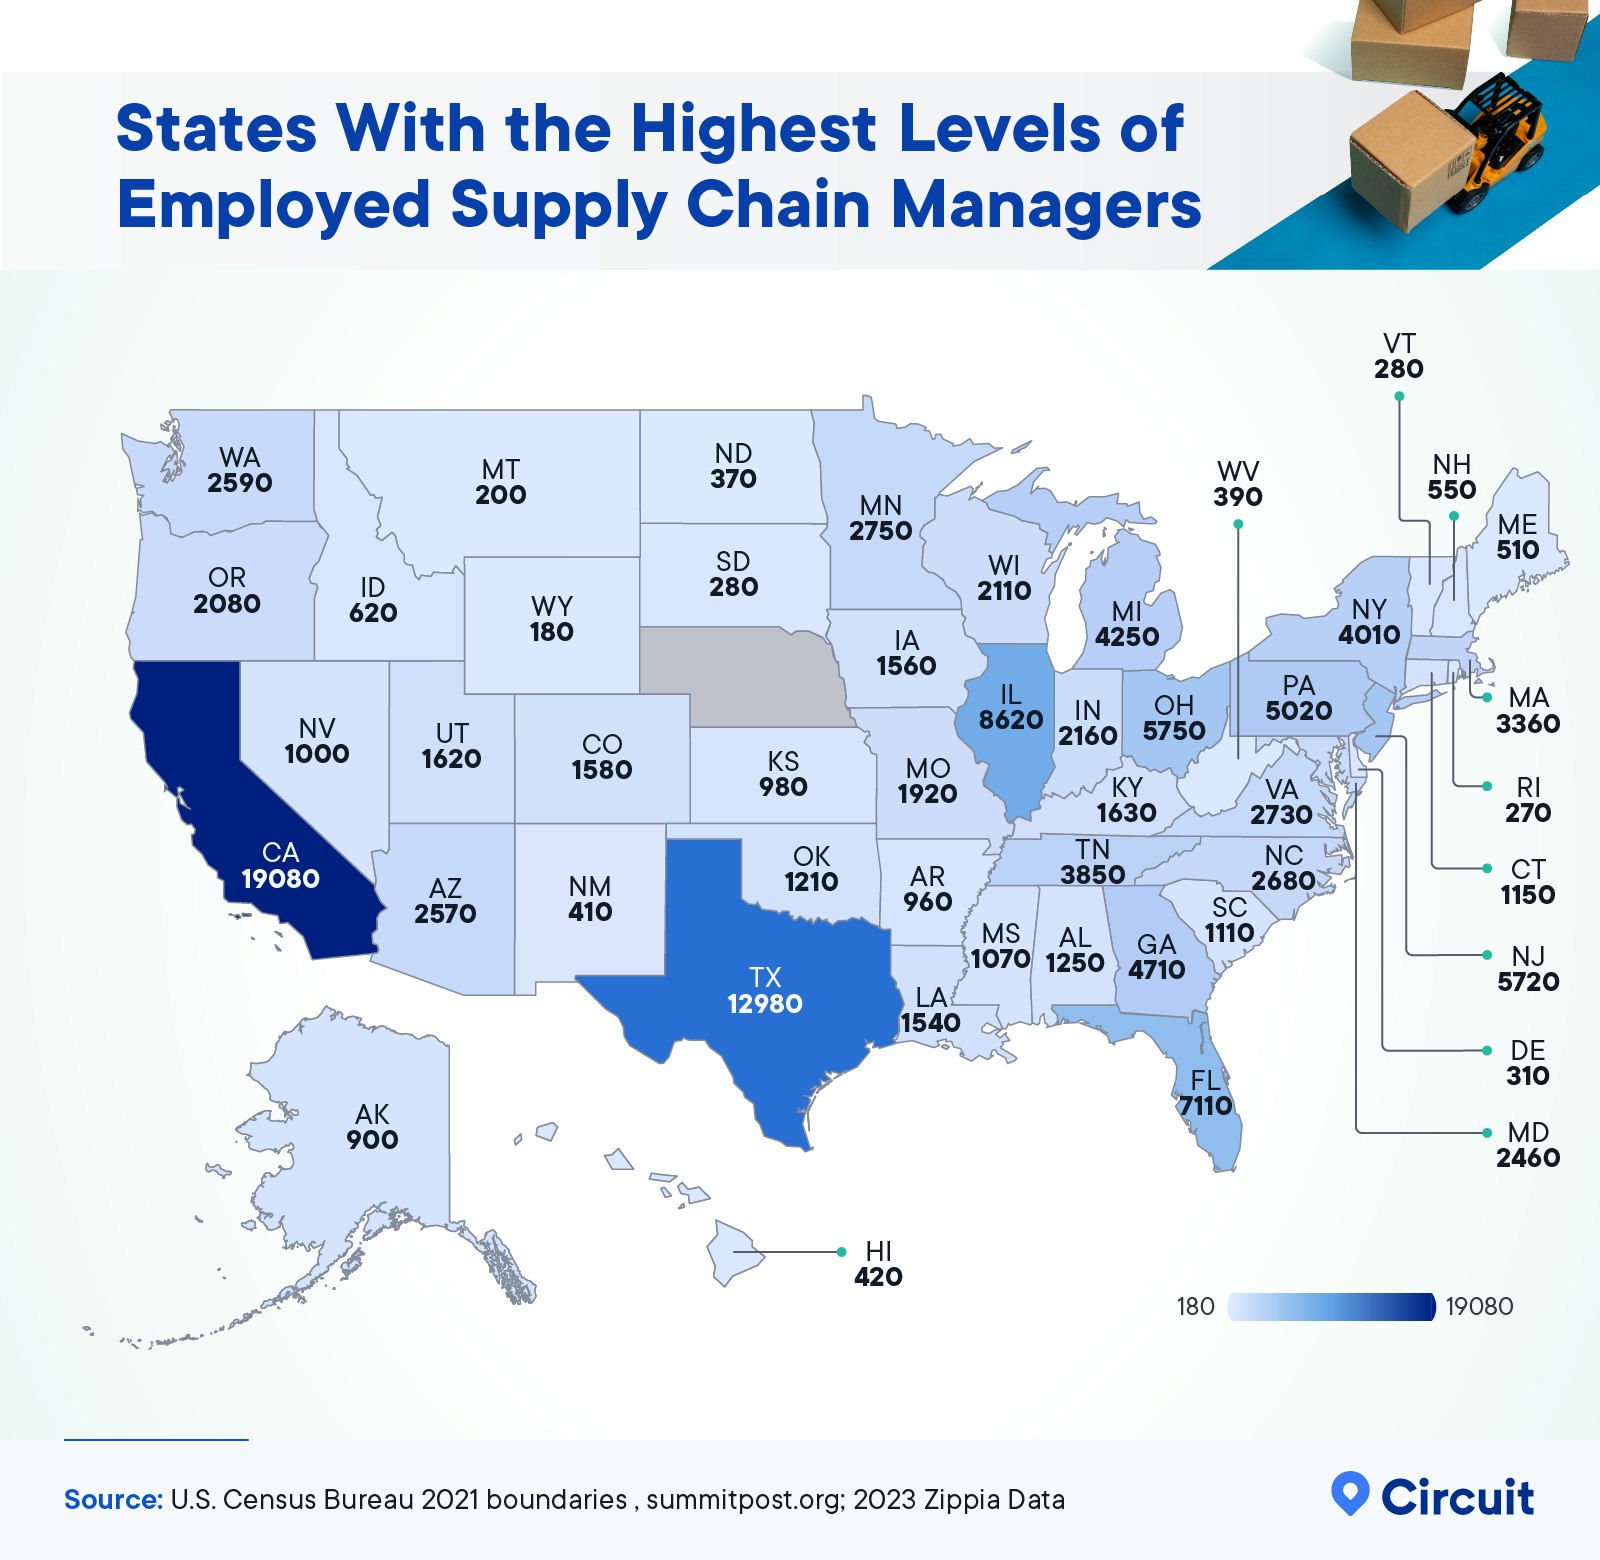 States with the highest levels of employed supply chain managers